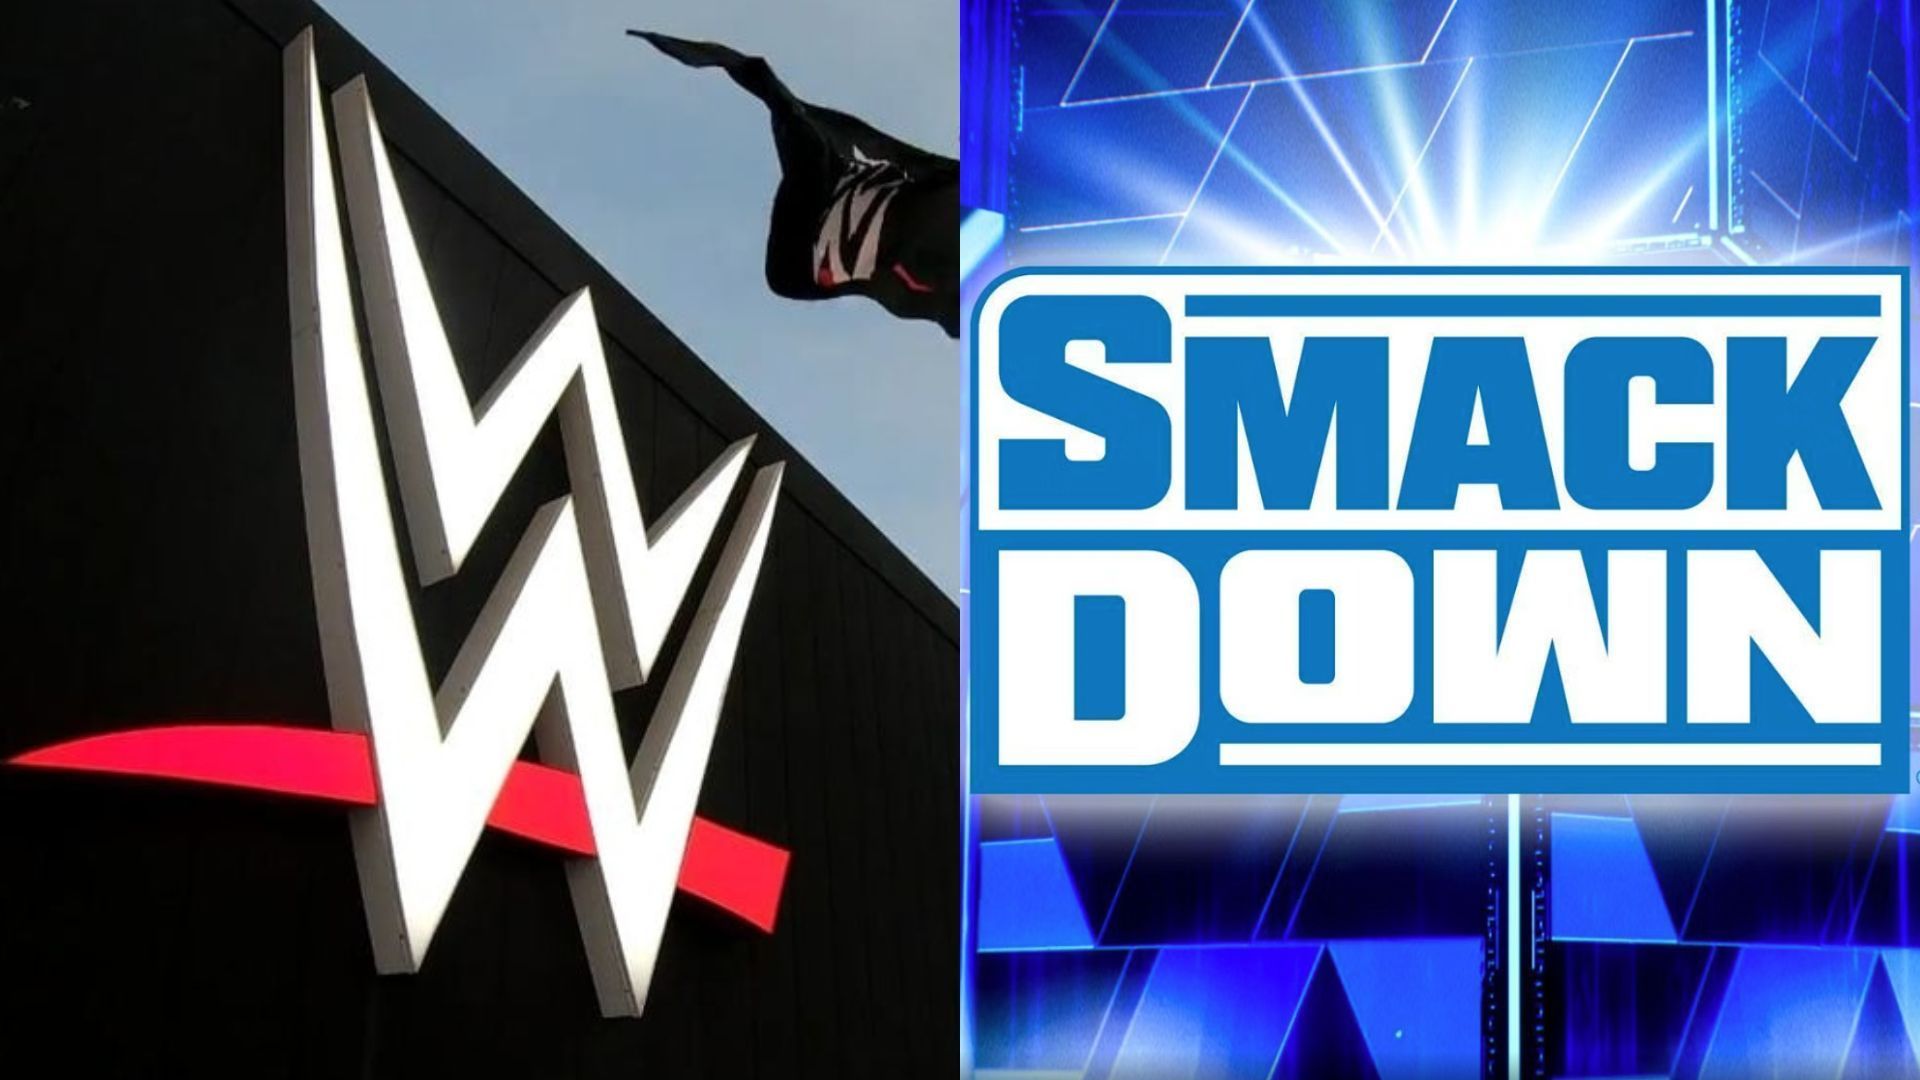 SmackDown is shaping up to be a big show tonight!